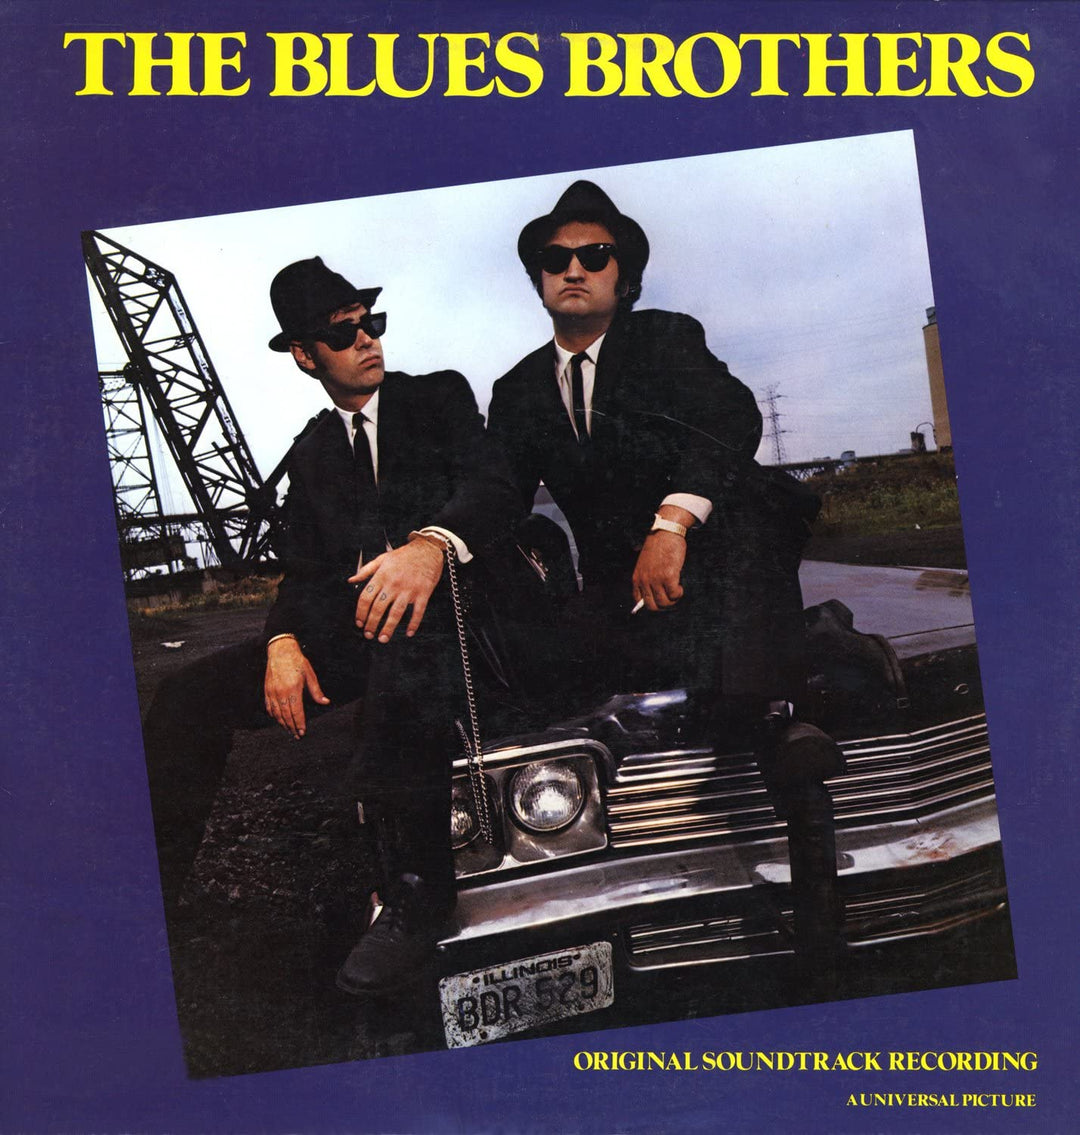 The Blue Brothers Soundtrack - The Blues Brothers [Audio-CD]